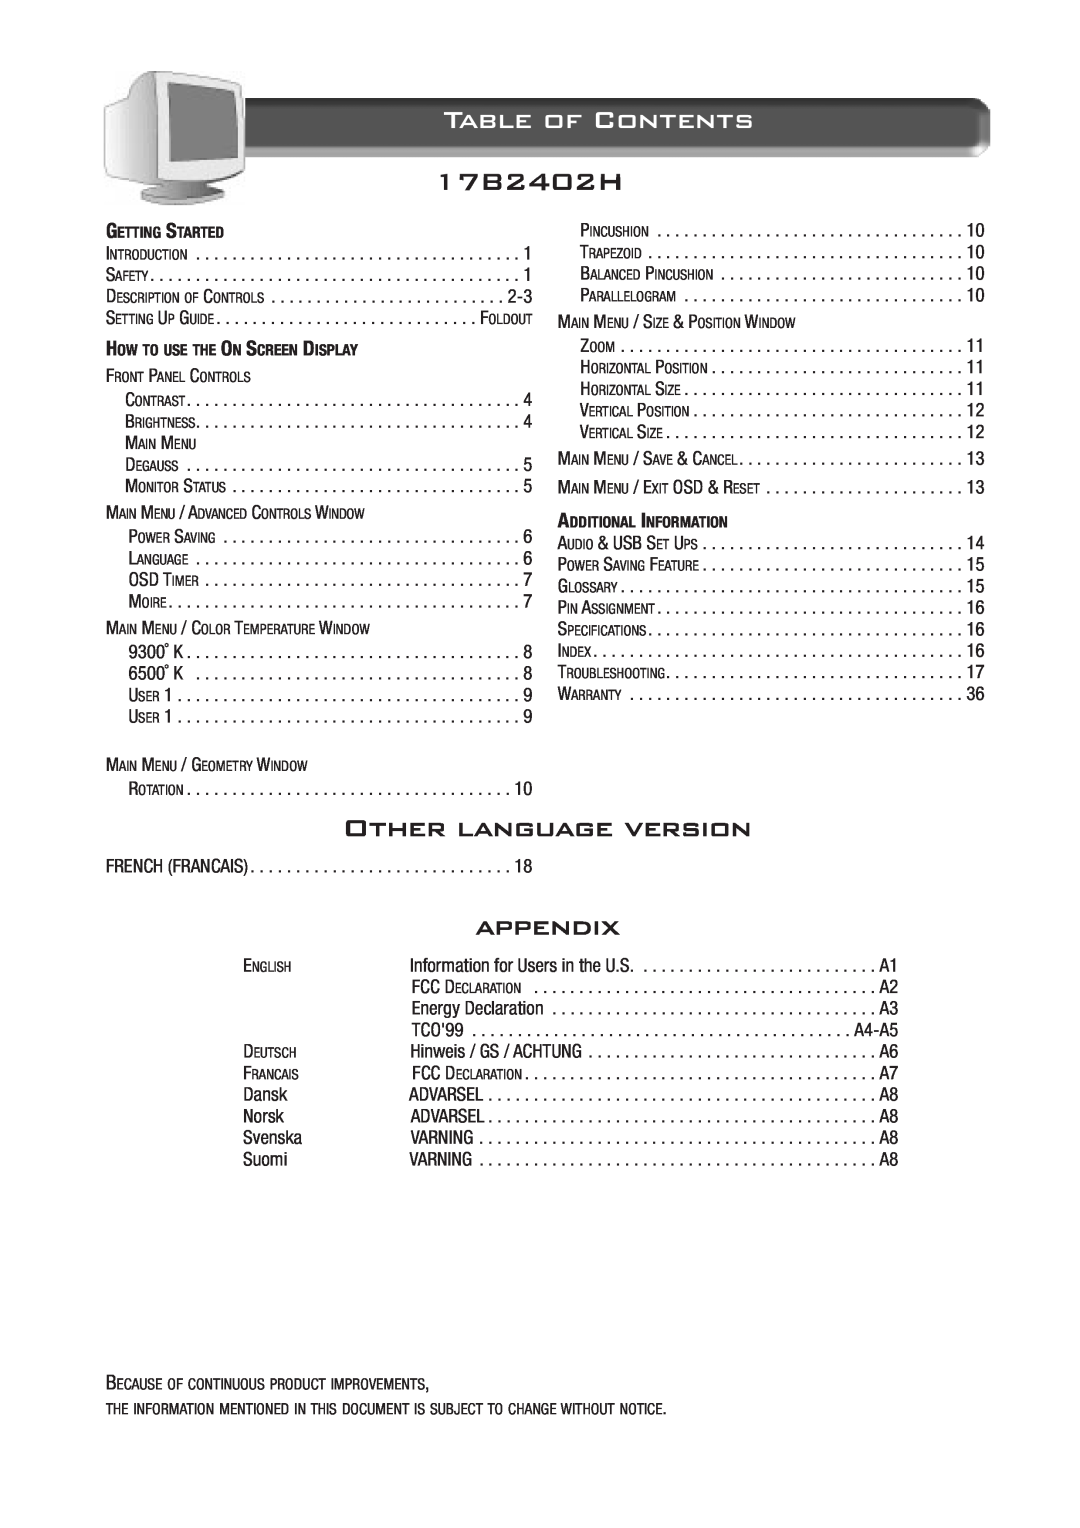 Philips 17B2402H appendix Table of Contents, Other language version 